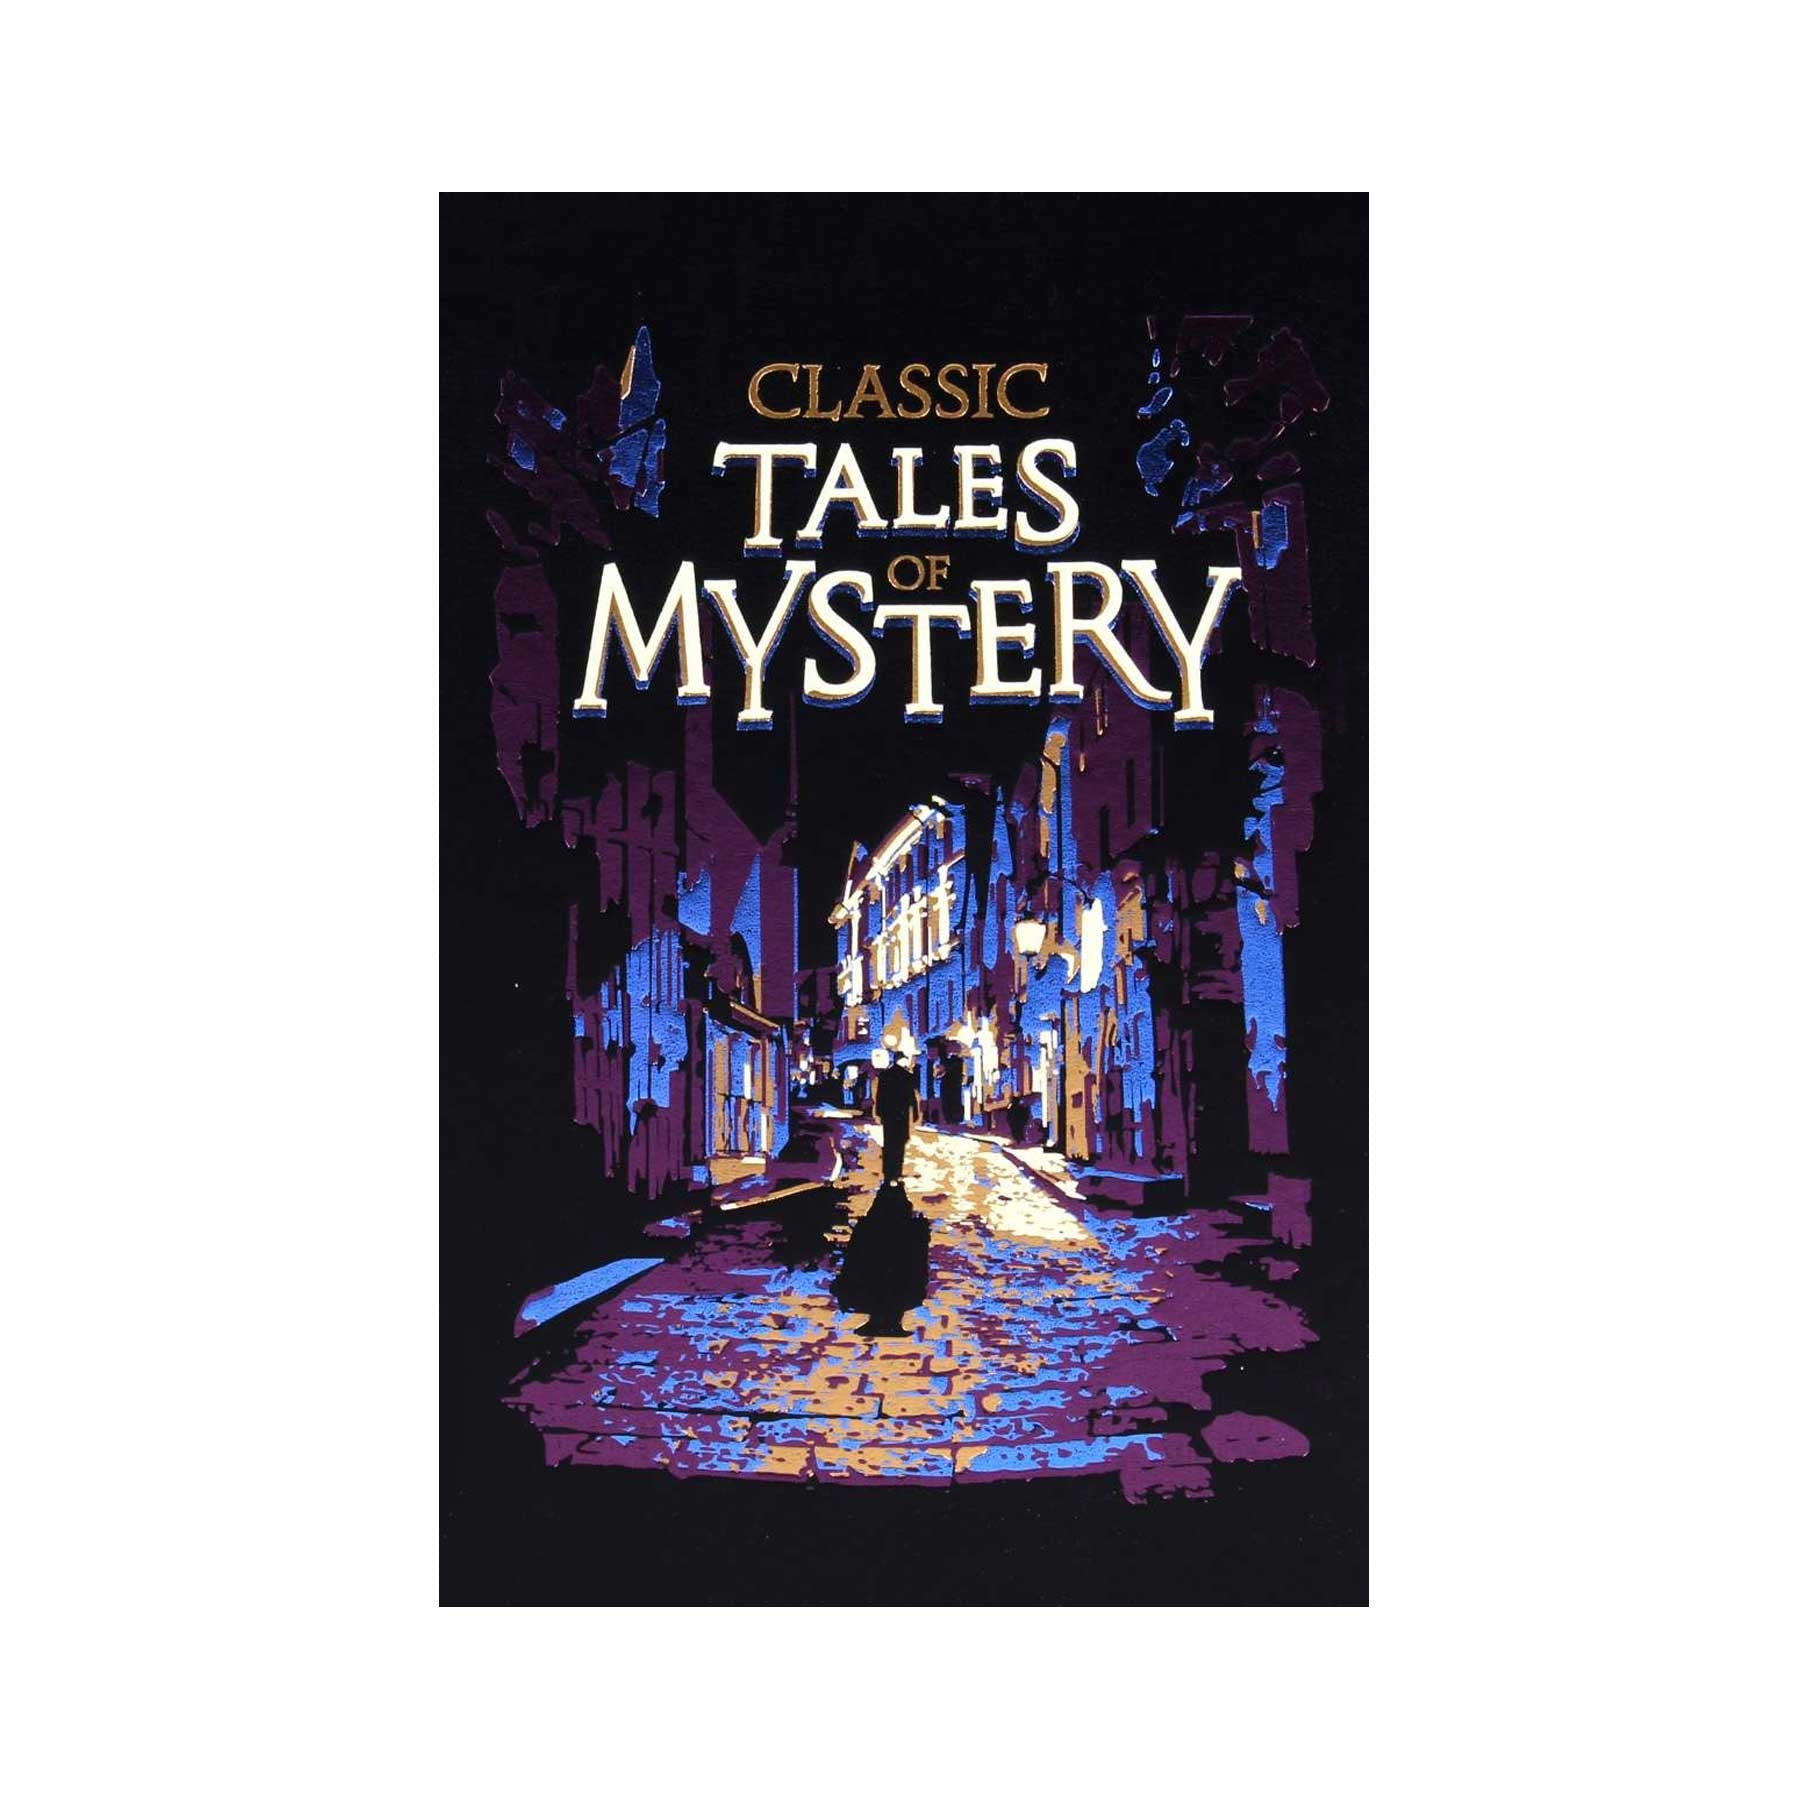 Classic Tales of Mystery Leather Bound Edition